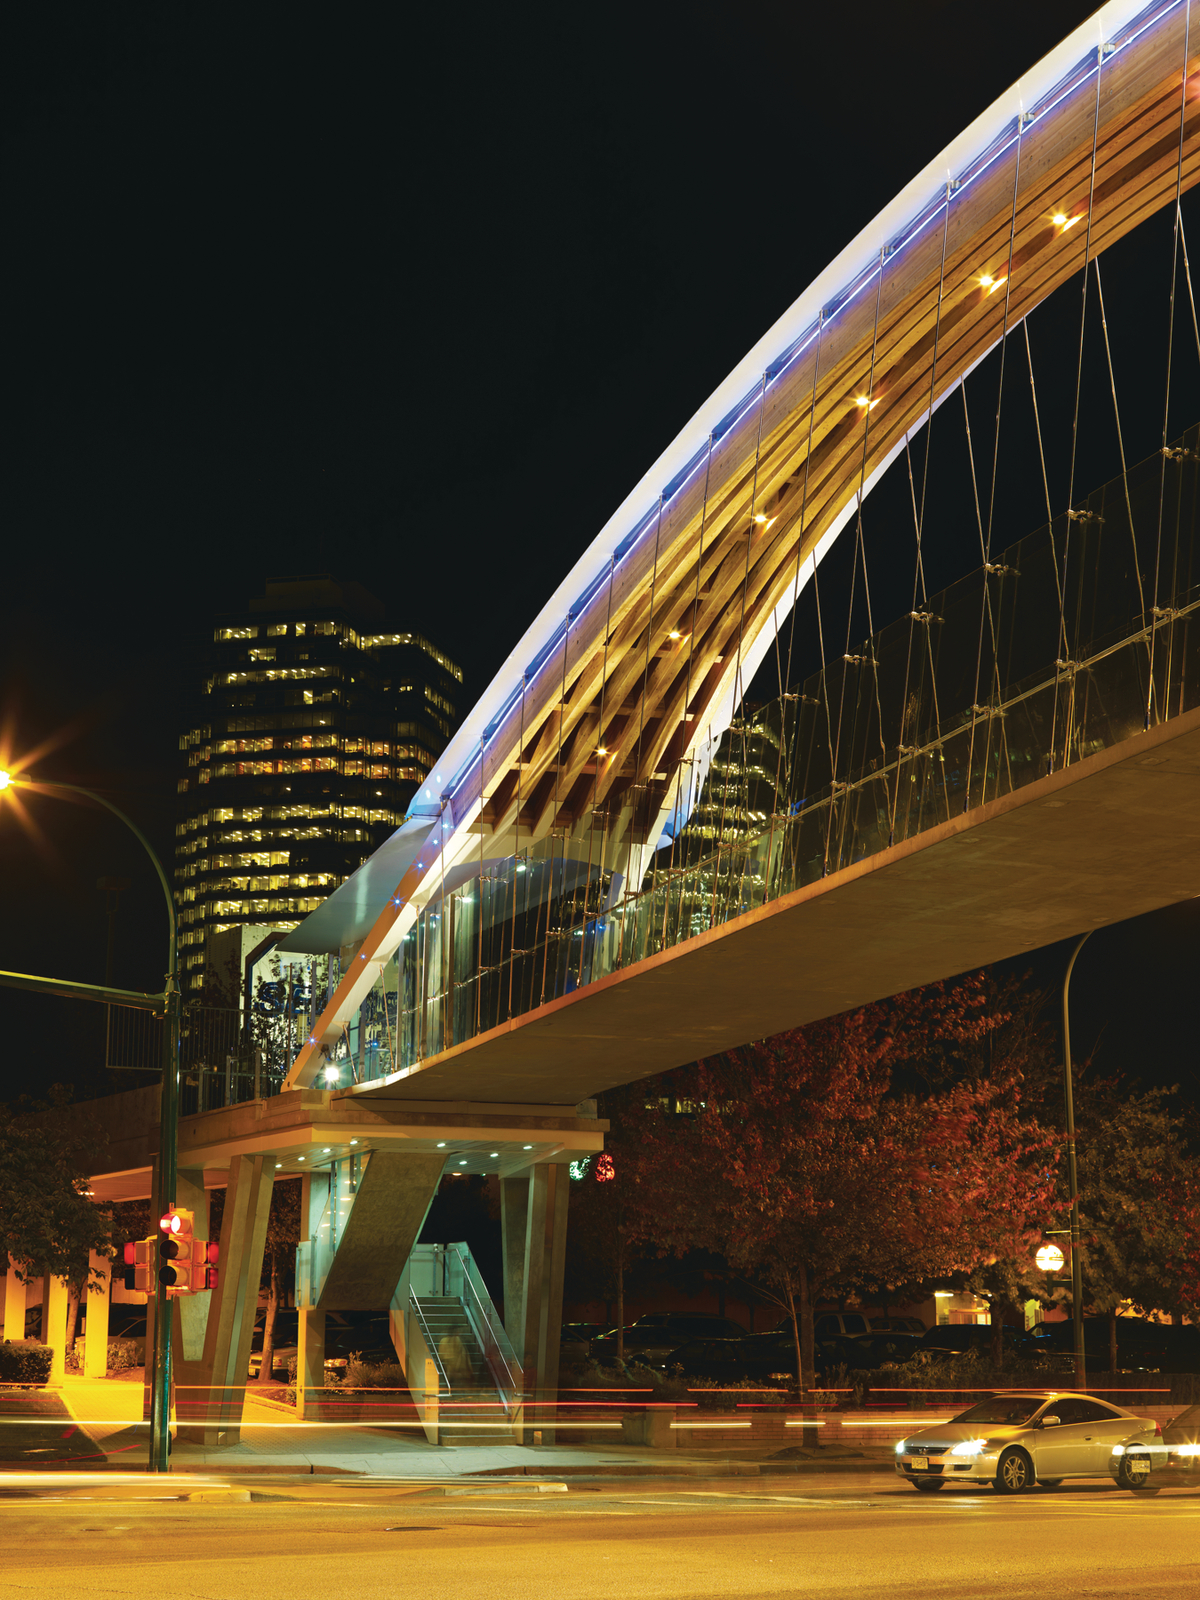 Exterior nightime view of Kingsway Pedestrian Bridge showing double-curved glue-laminated timber (glulam) arch with walkway suspended by steel cables below